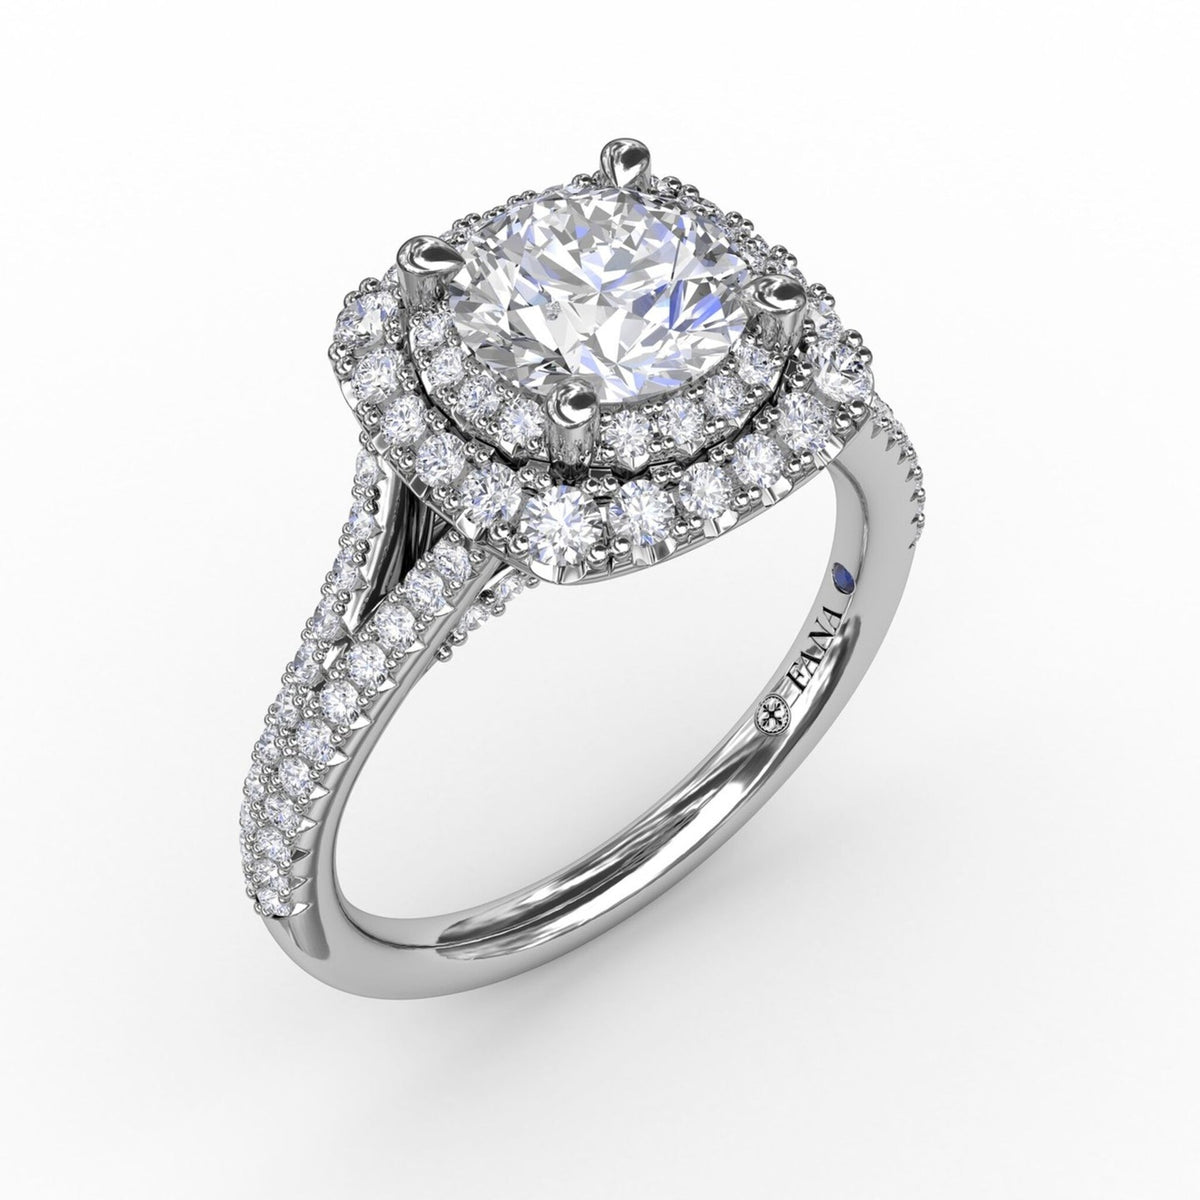 Elegant Halo Engagement Ring with Central Gemstone and Diamond Accents